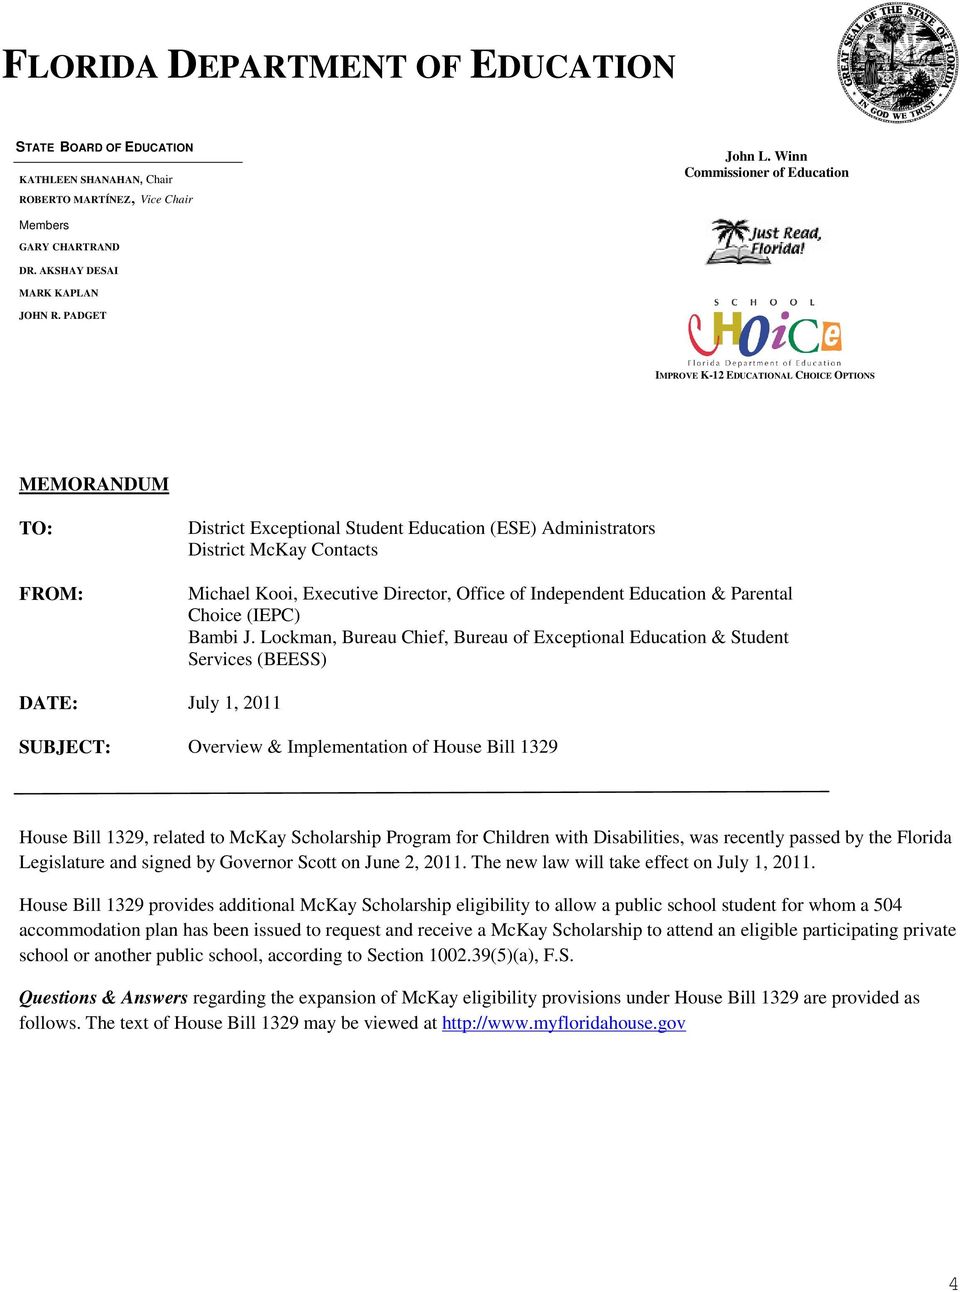 PADGET IMPROVE K-12 EDUCATIONAL CHOICE OPTIONS MEMORANDUM TO: FROM: District Exceptional Student Education (ESE) Administrators District McKay Contacts Michael Kooi, Executive Director, Office of